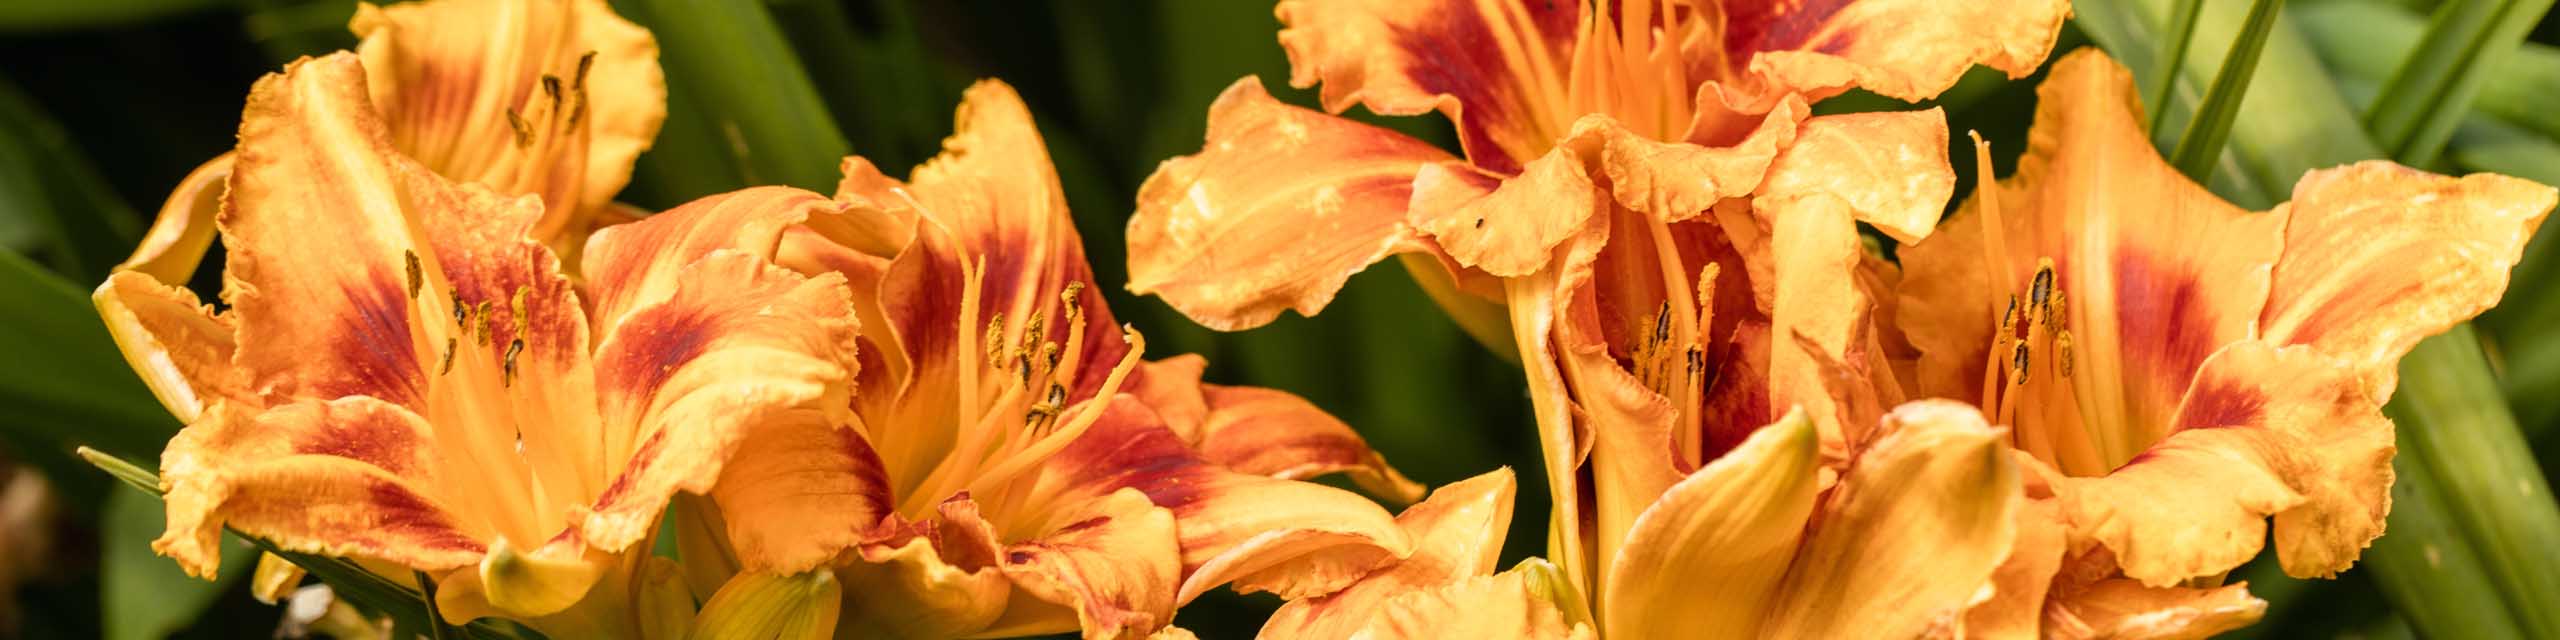 Close up of fancy orange and red daylily flowers.